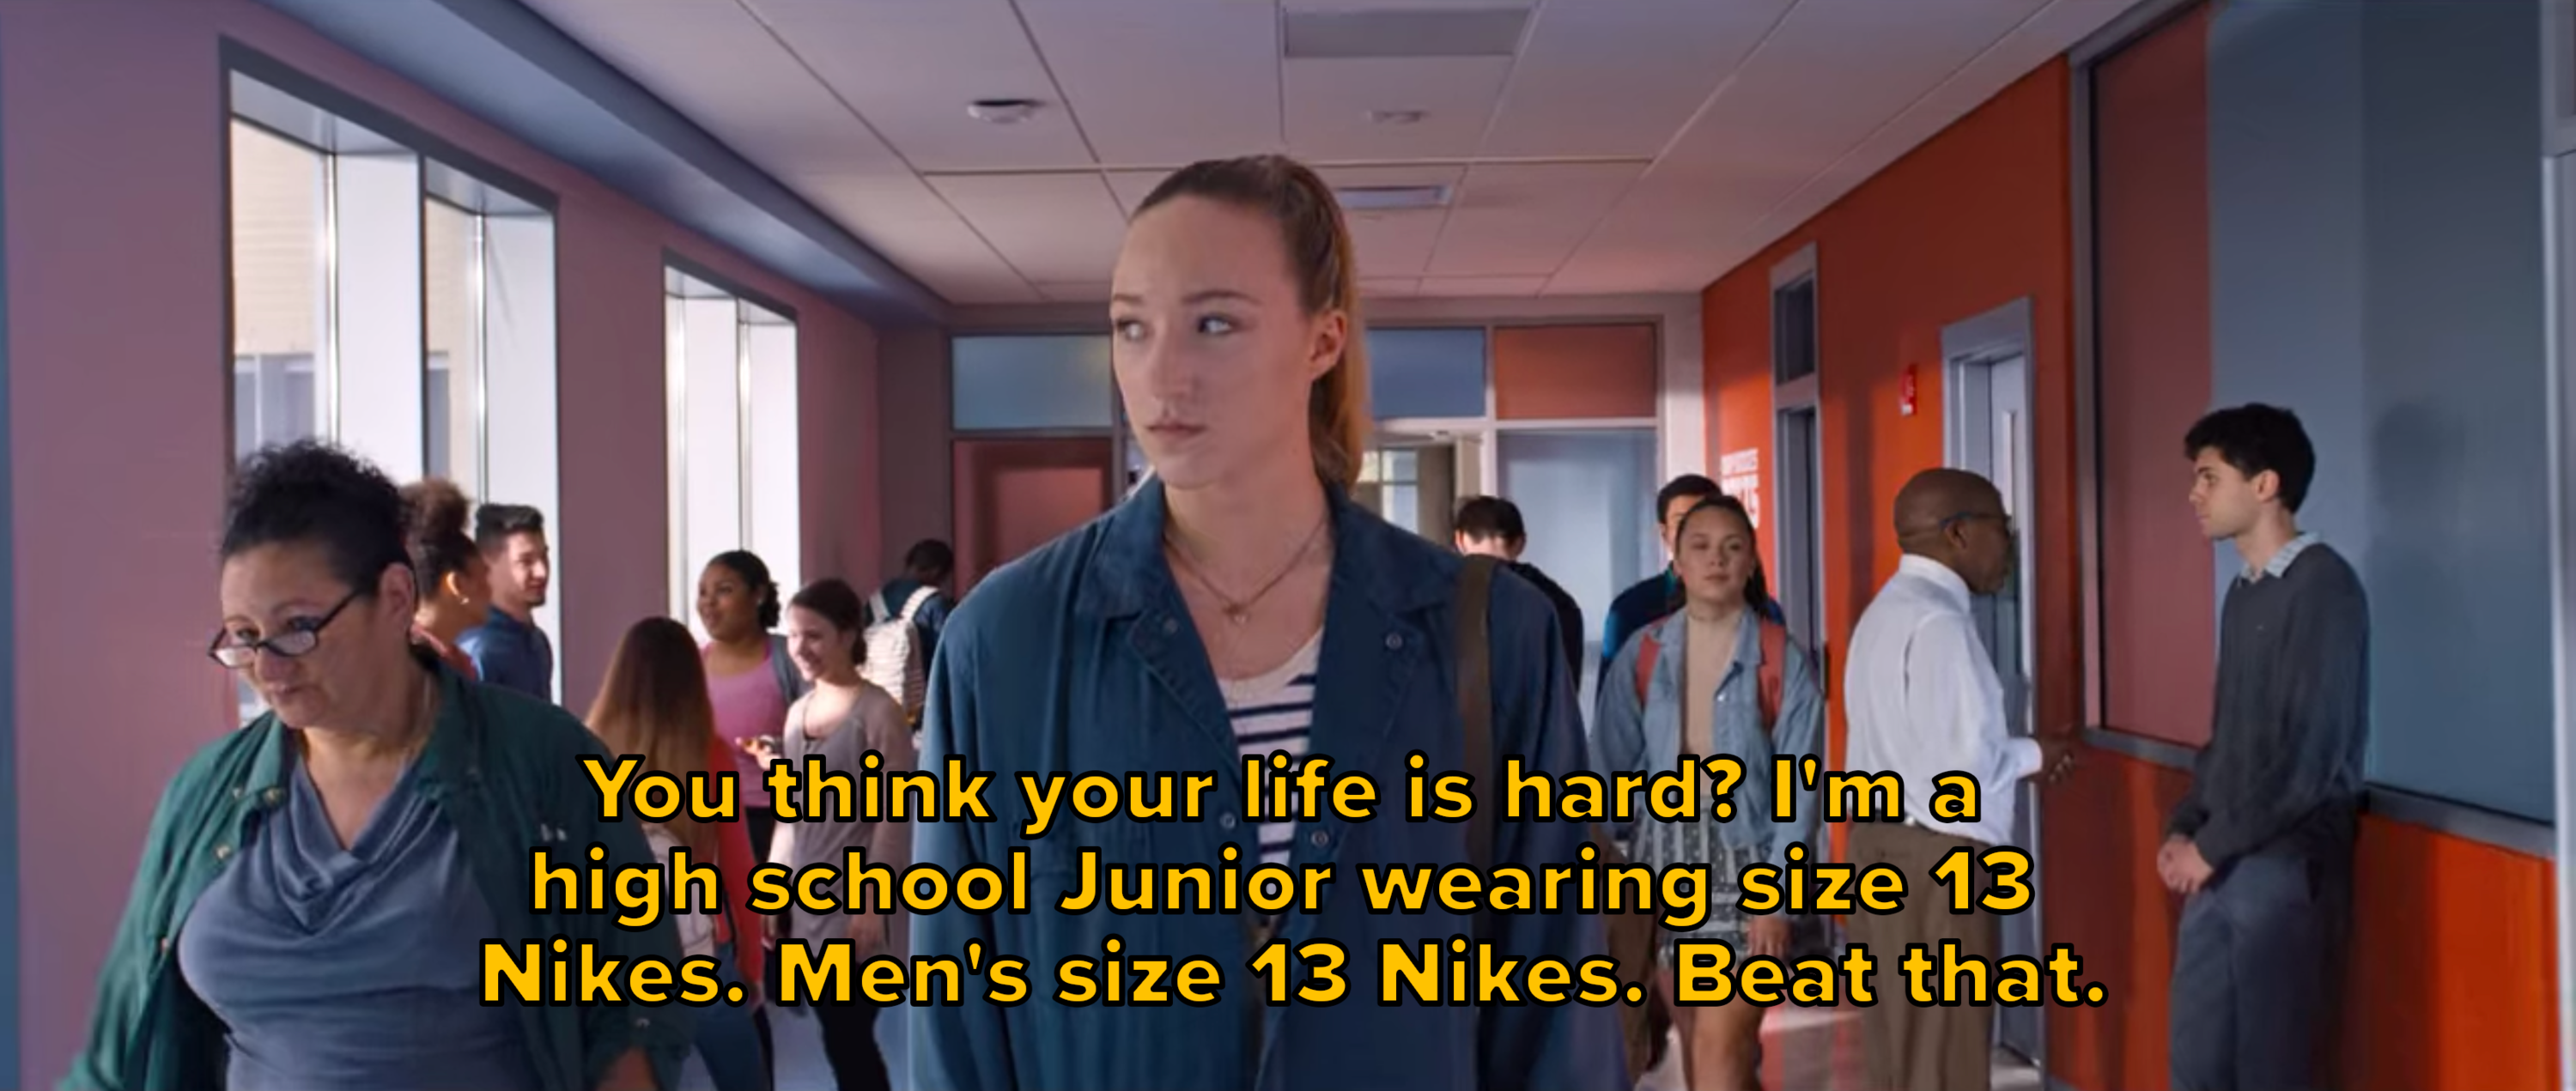 girl with size 13 nikes